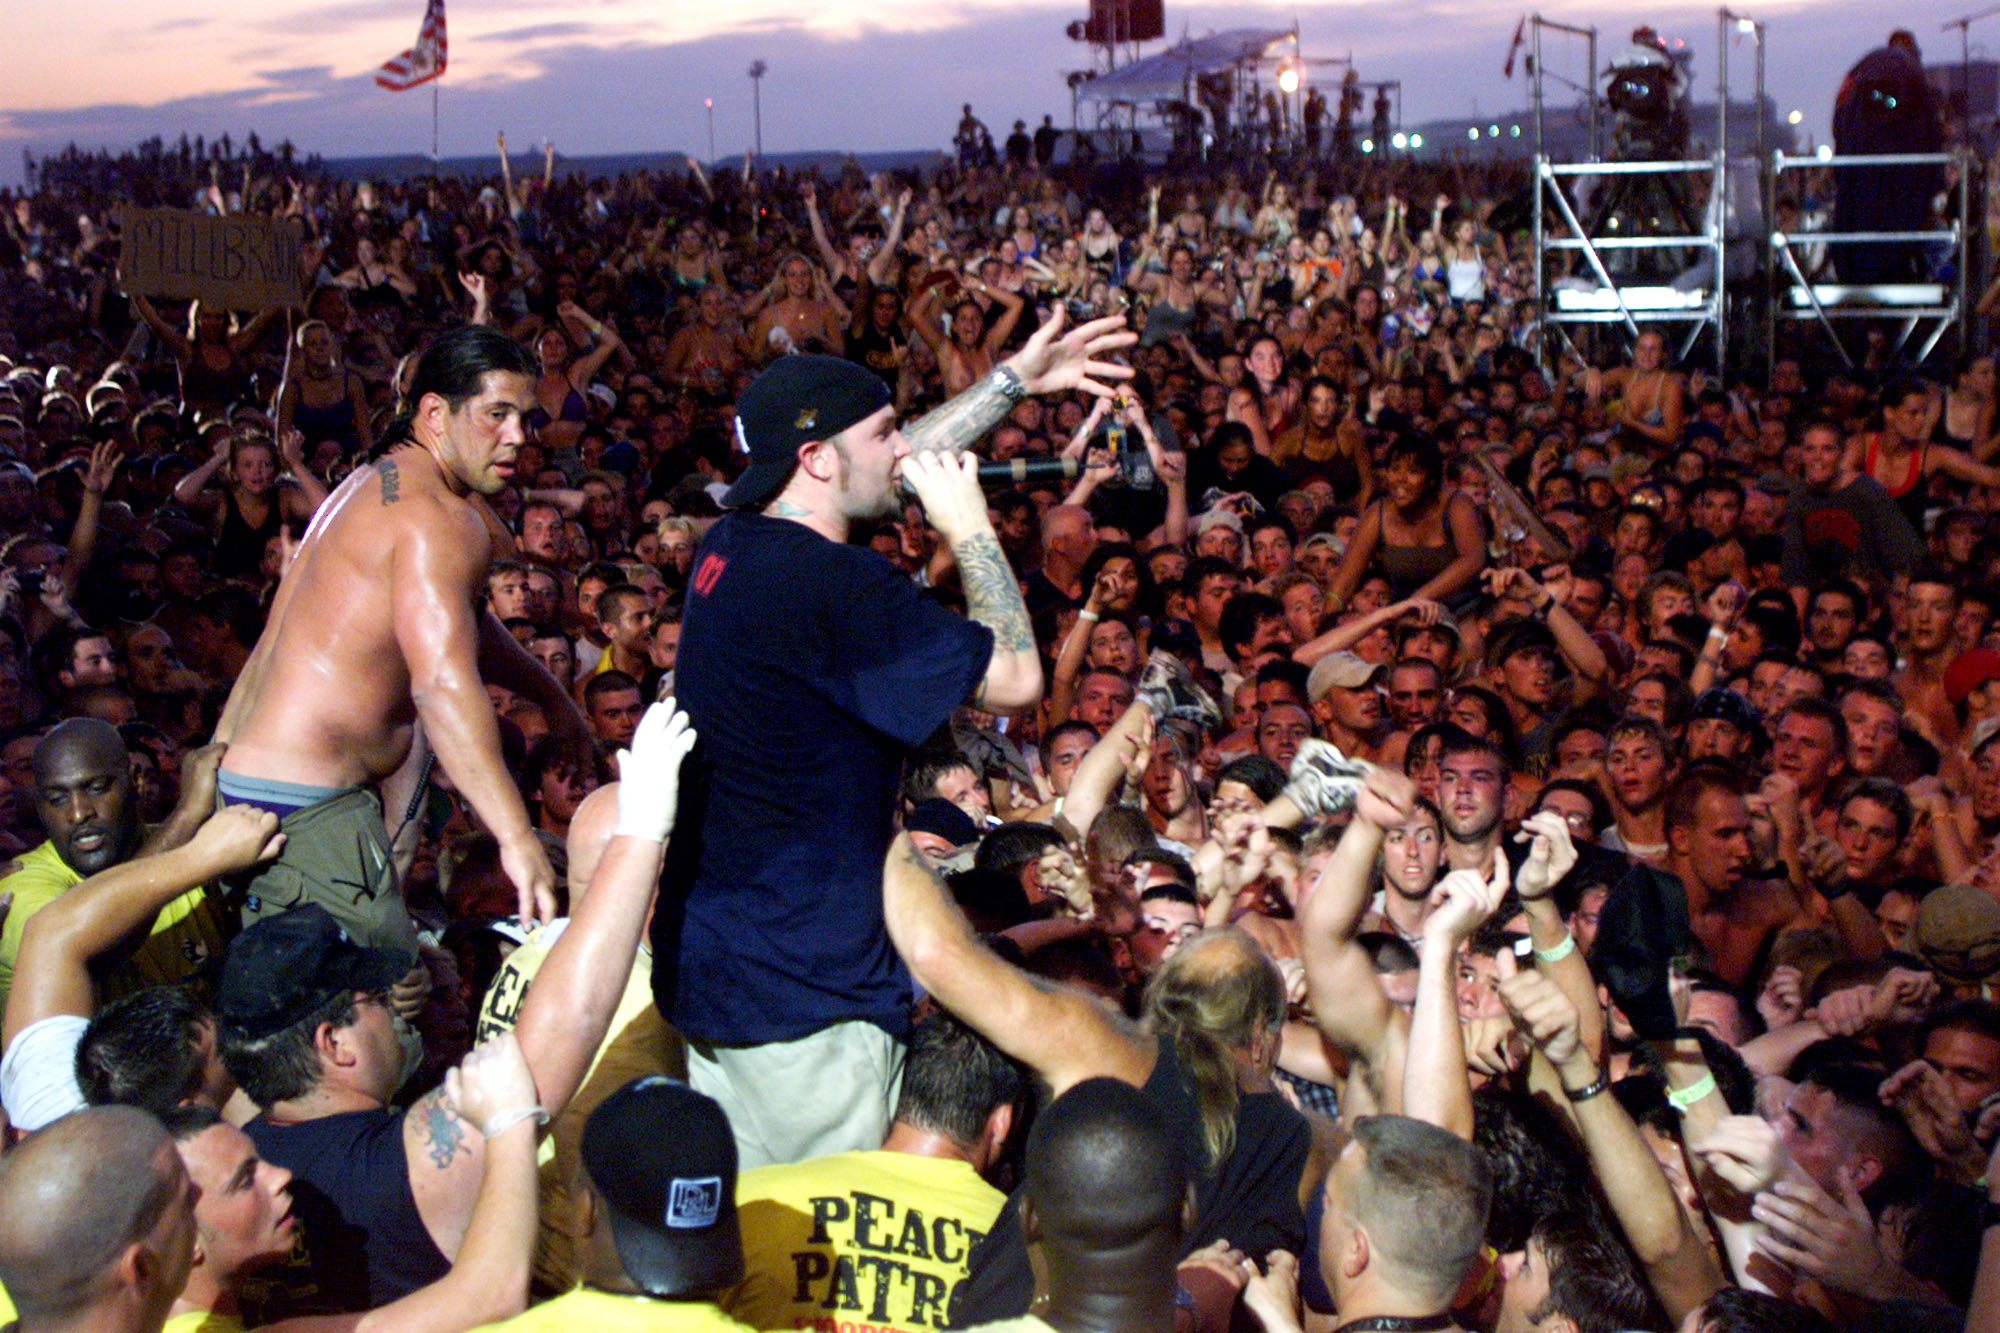 Limp Bizkit's Fred Durst brings his performance to the head of the crowd of the east stage Saturday at Woodstock '99 in Rome, New York